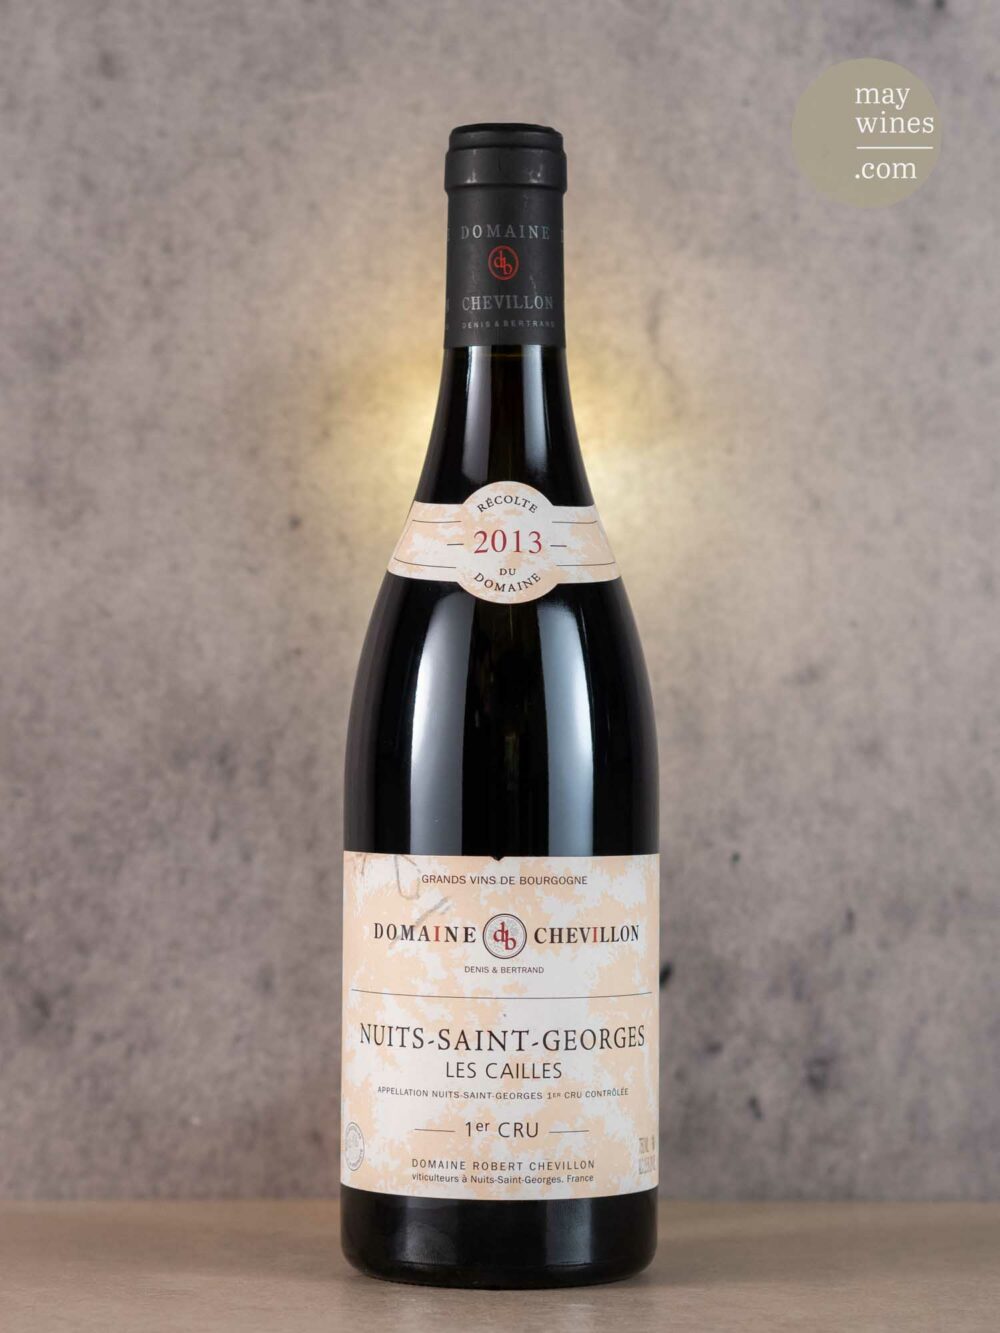 May Wines – Rotwein – 2013 Nuits-Saint-Georges Les Cailles Premier Cru - Domaine Robert Chevillon